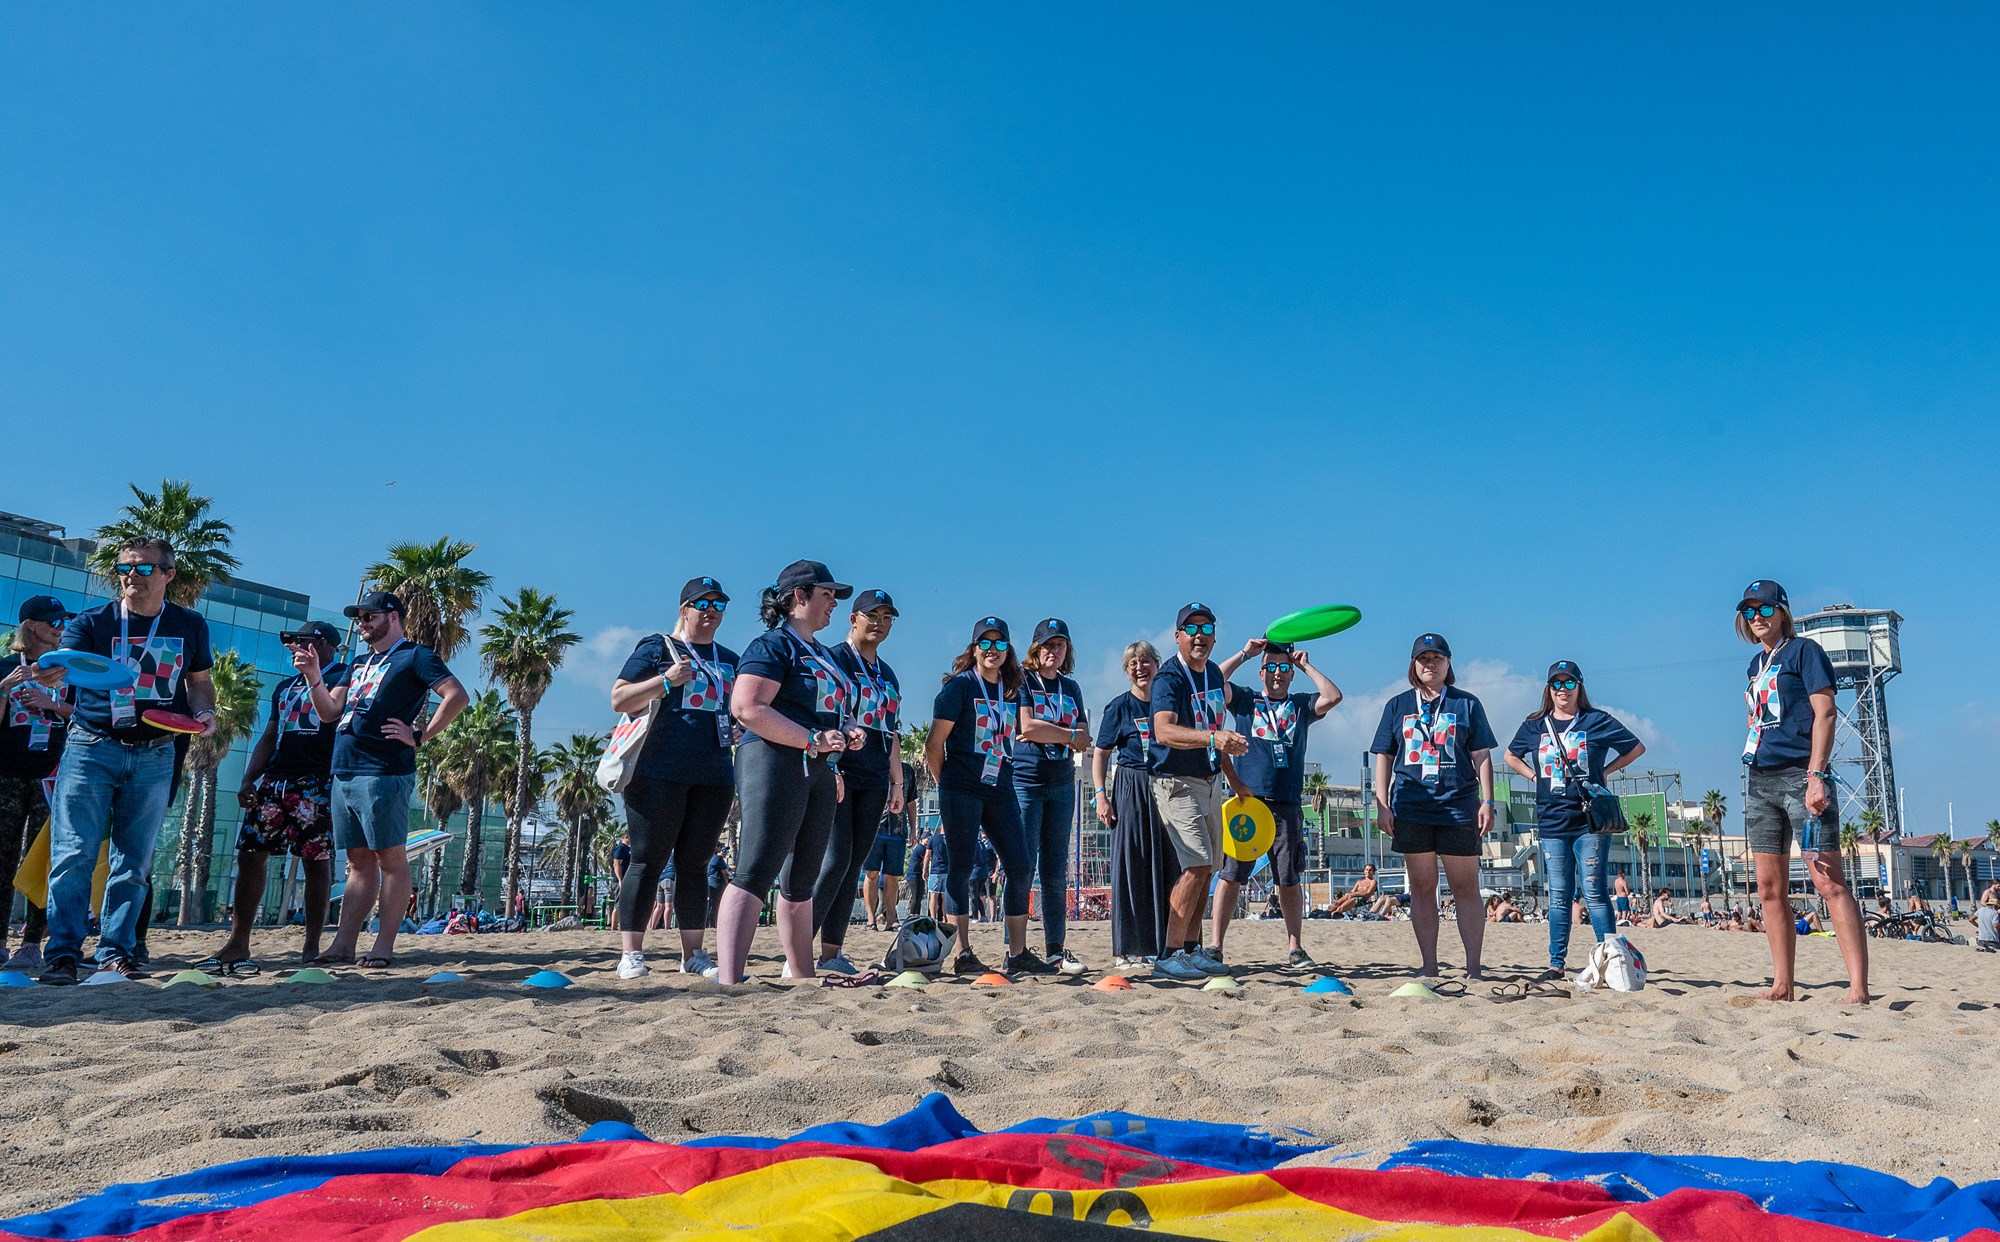 Bringing the K2 culture to life in Barcelona